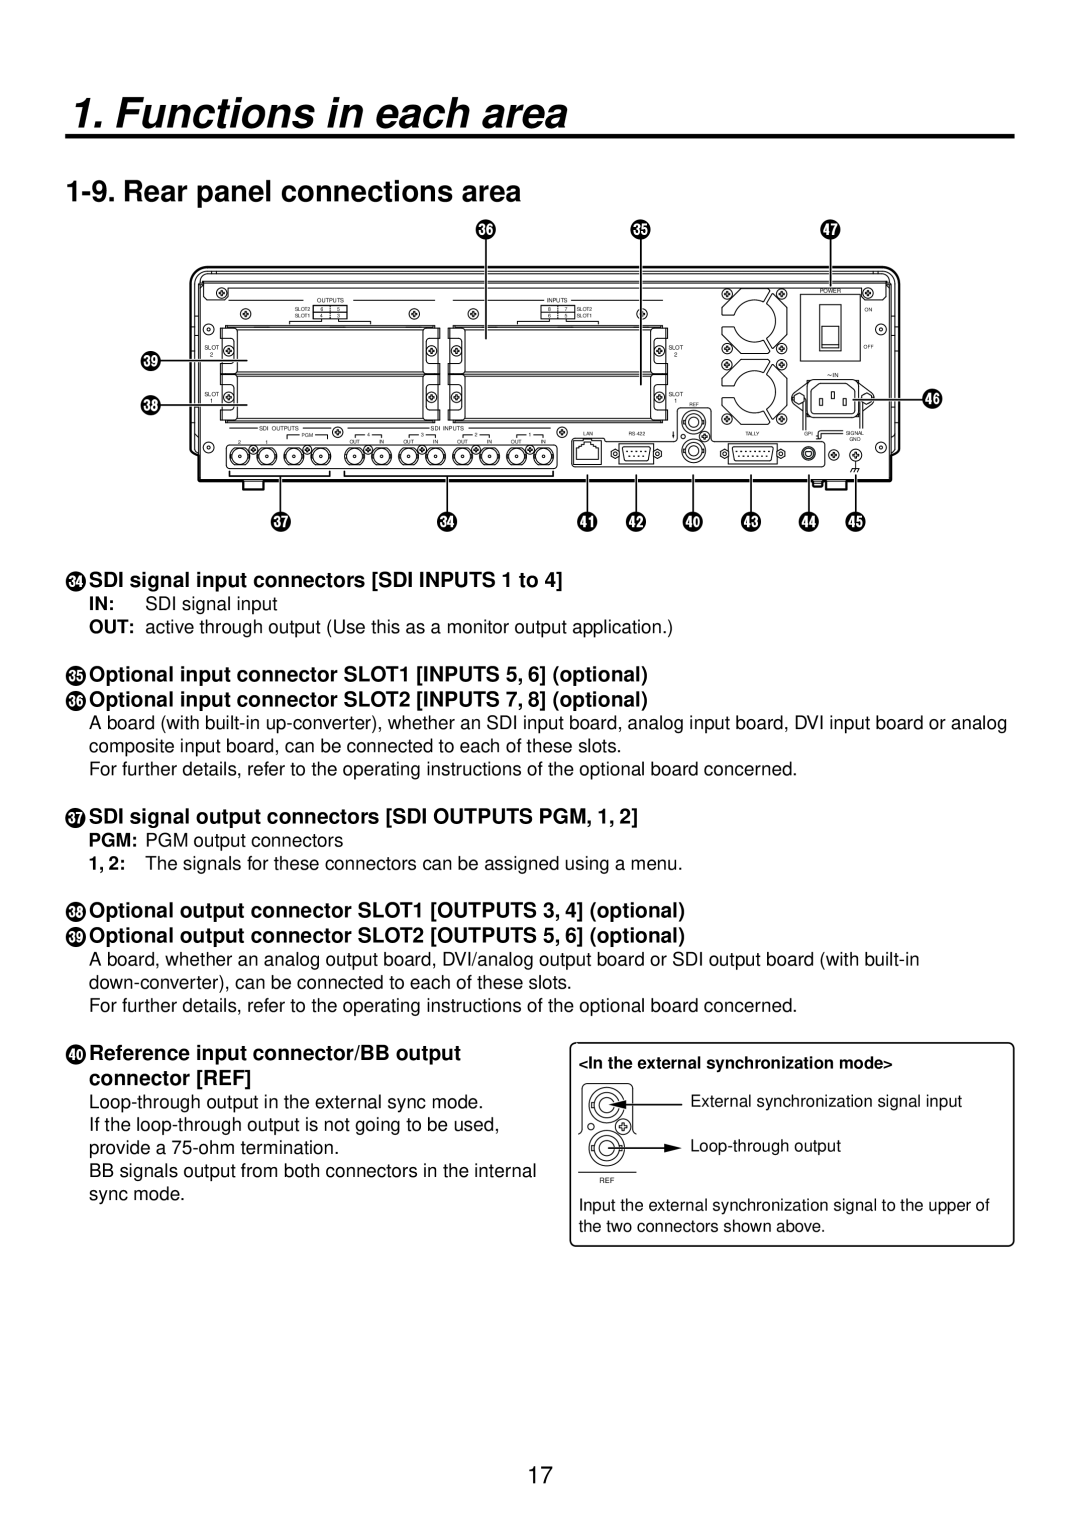 Panasonic AV-HS400AN Rear panel connections area, Functions in each area, R SDI signal input connectors SDI INPUTS 1 to 